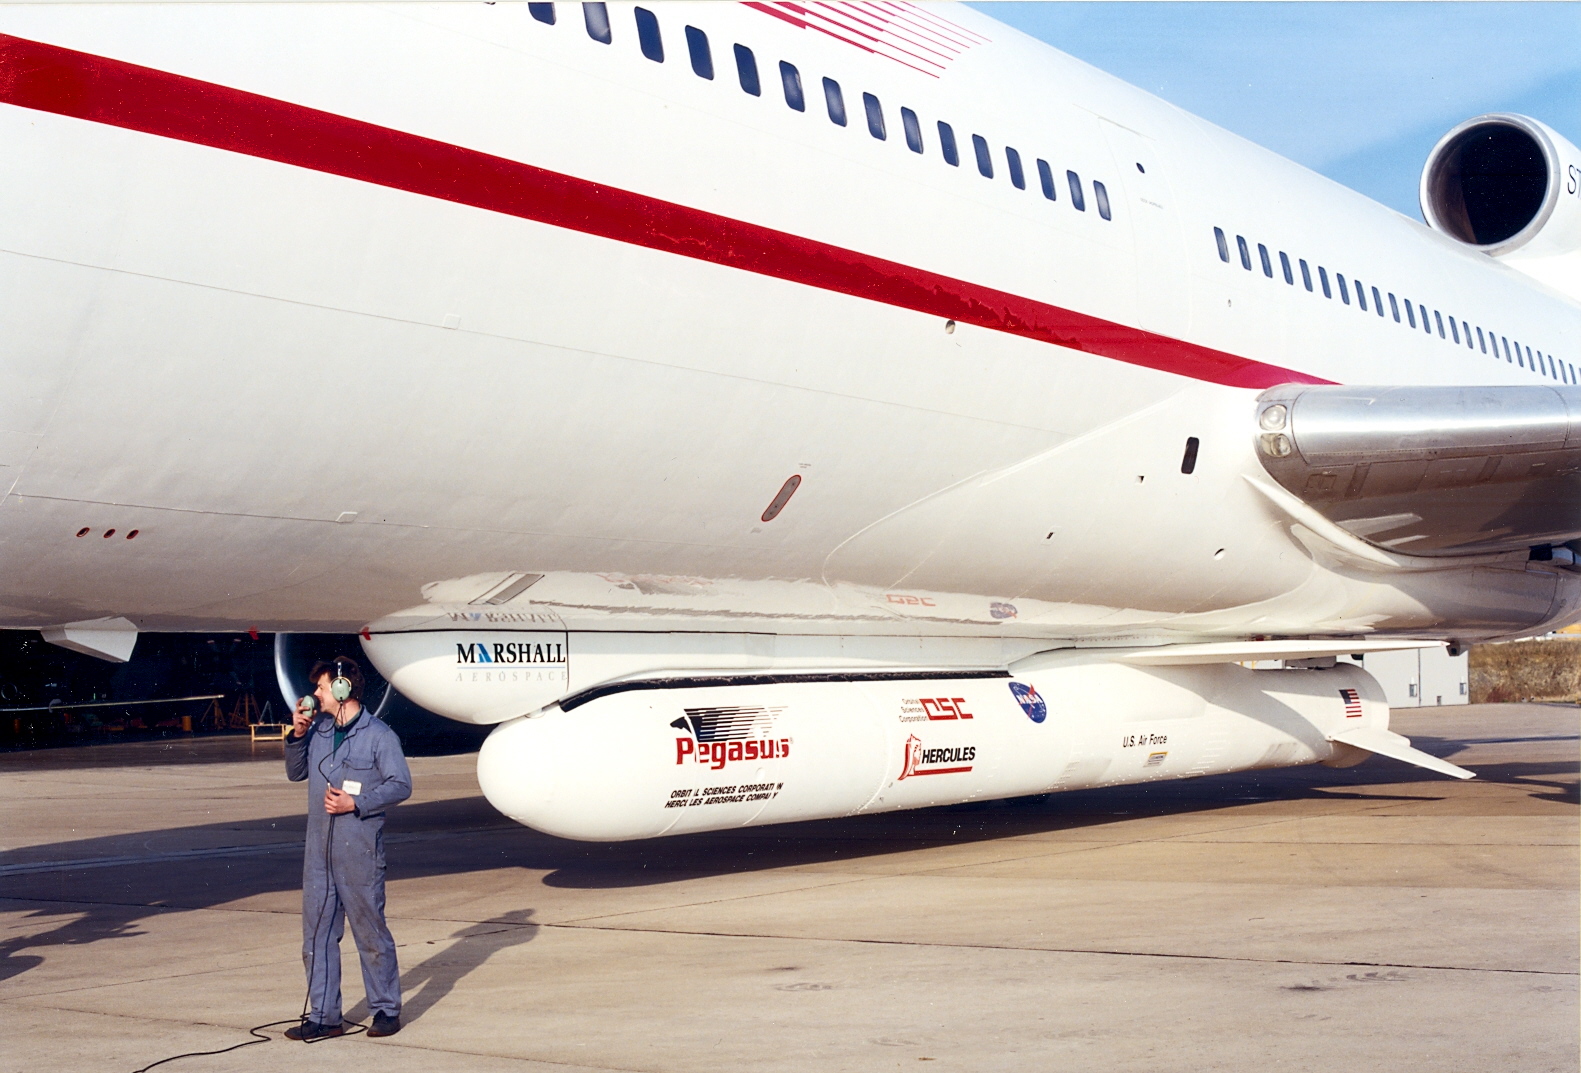 Stargazer - a Lockheed Martin L1011 TriStar modified by Marshall to carry a Pegasus XL satellite launch vehicle.